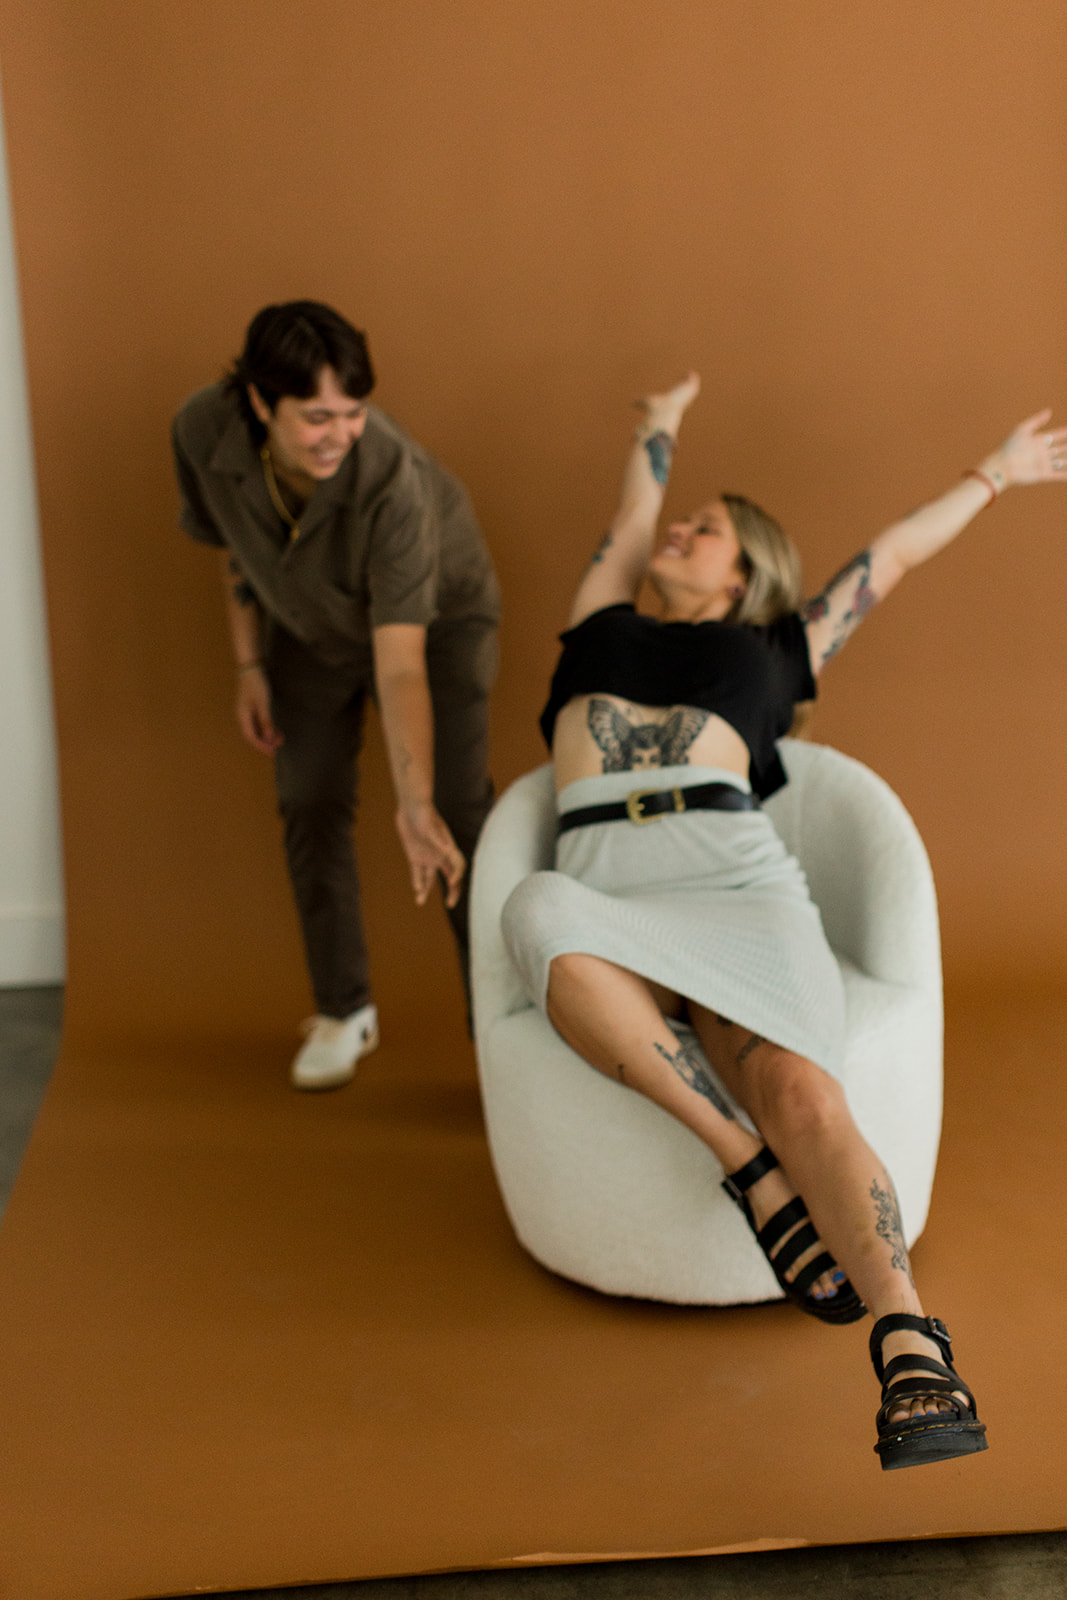 A couple playfully spin each other in a turning chair for a fun candid photo